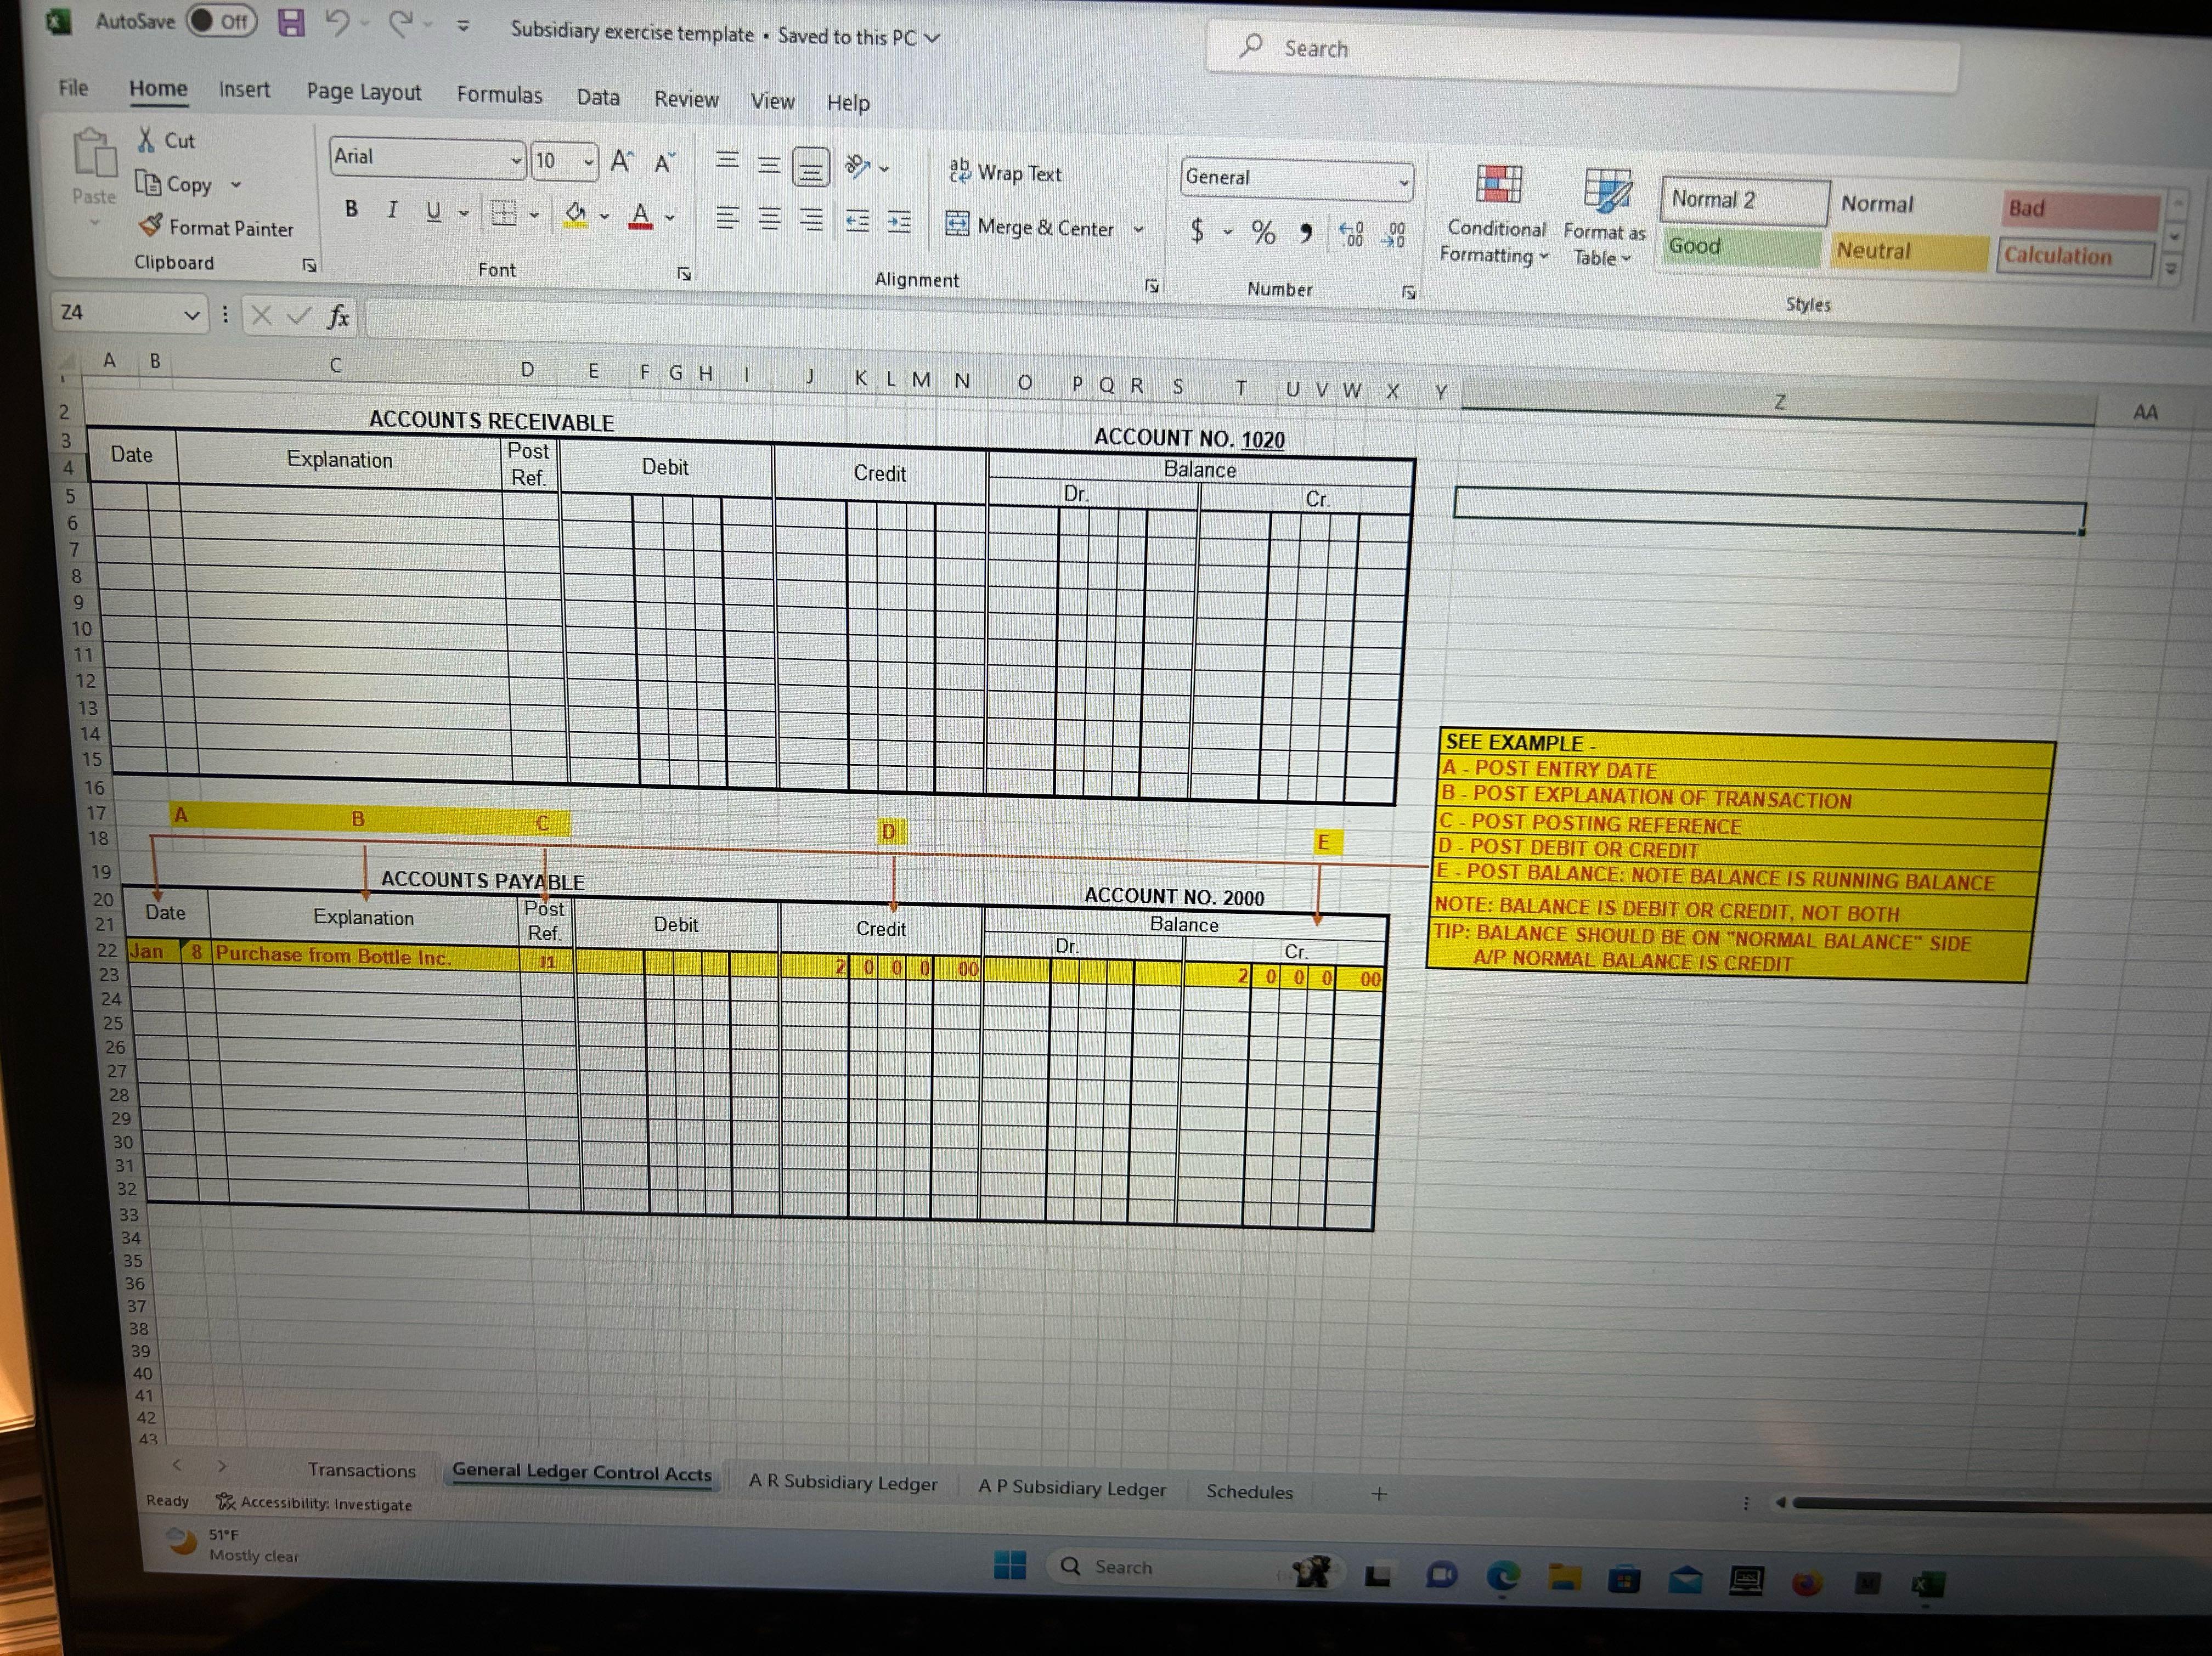 File Home Insert Page Layout Formulas Data Review X Cut [Copy Z4 2 3 Paste 4 LO AutoSave Off= Subsidiary